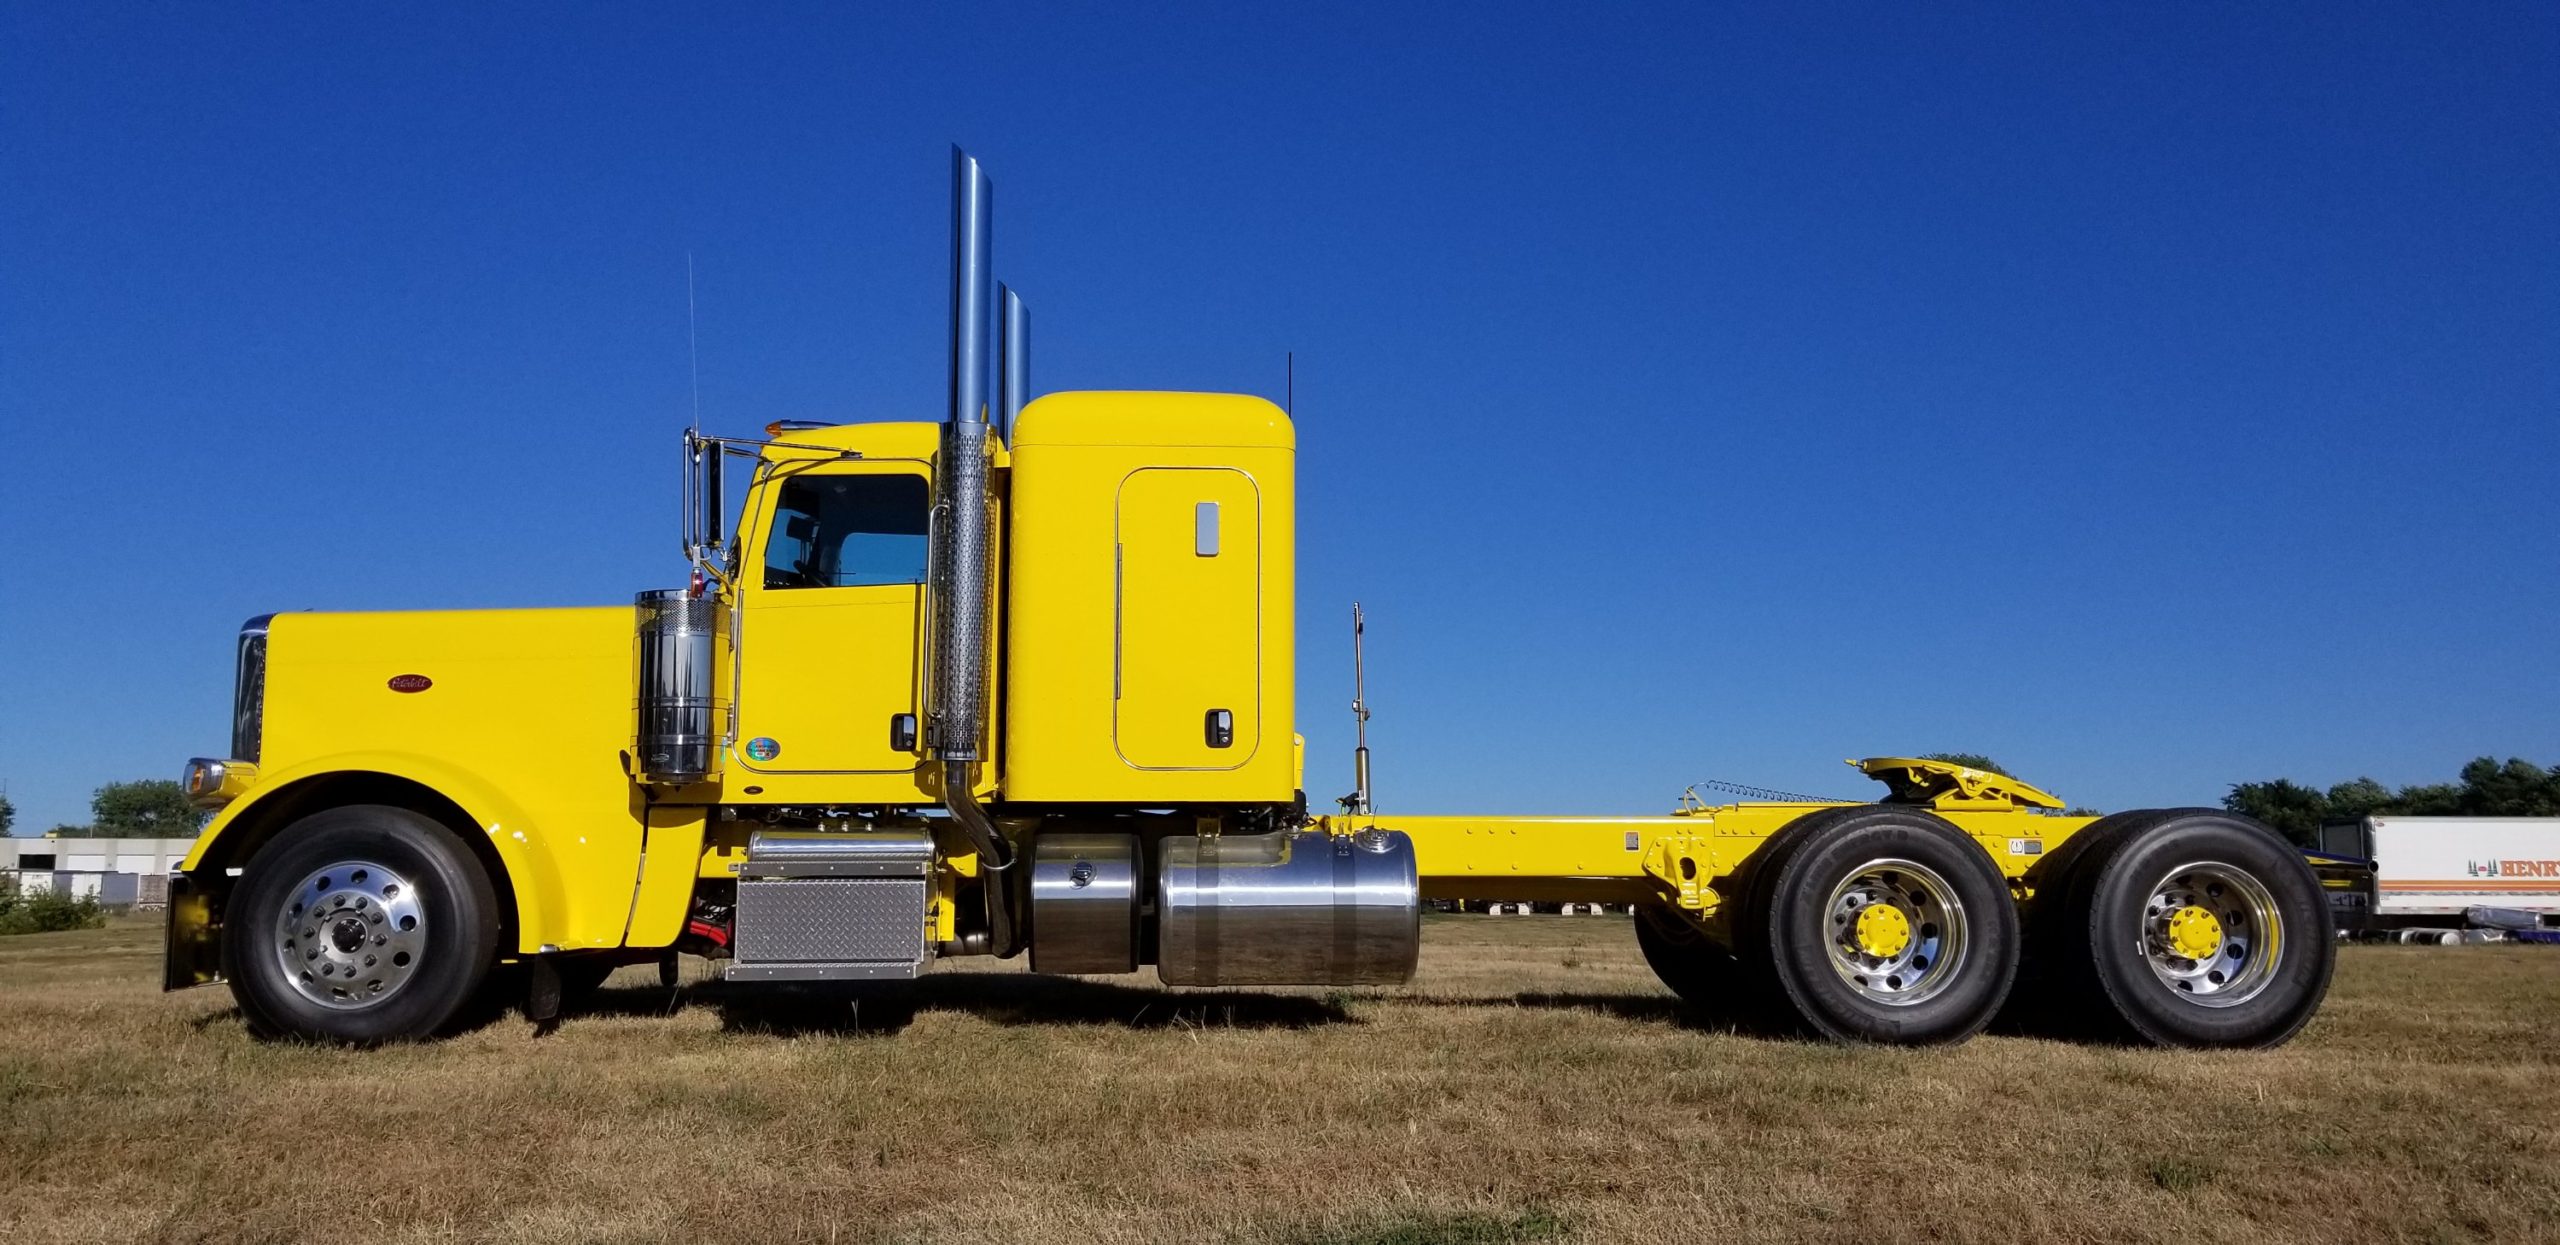 58" FLAT TOP 389 JUST IN FOR SALE! - Peterbilt of Sioux Falls